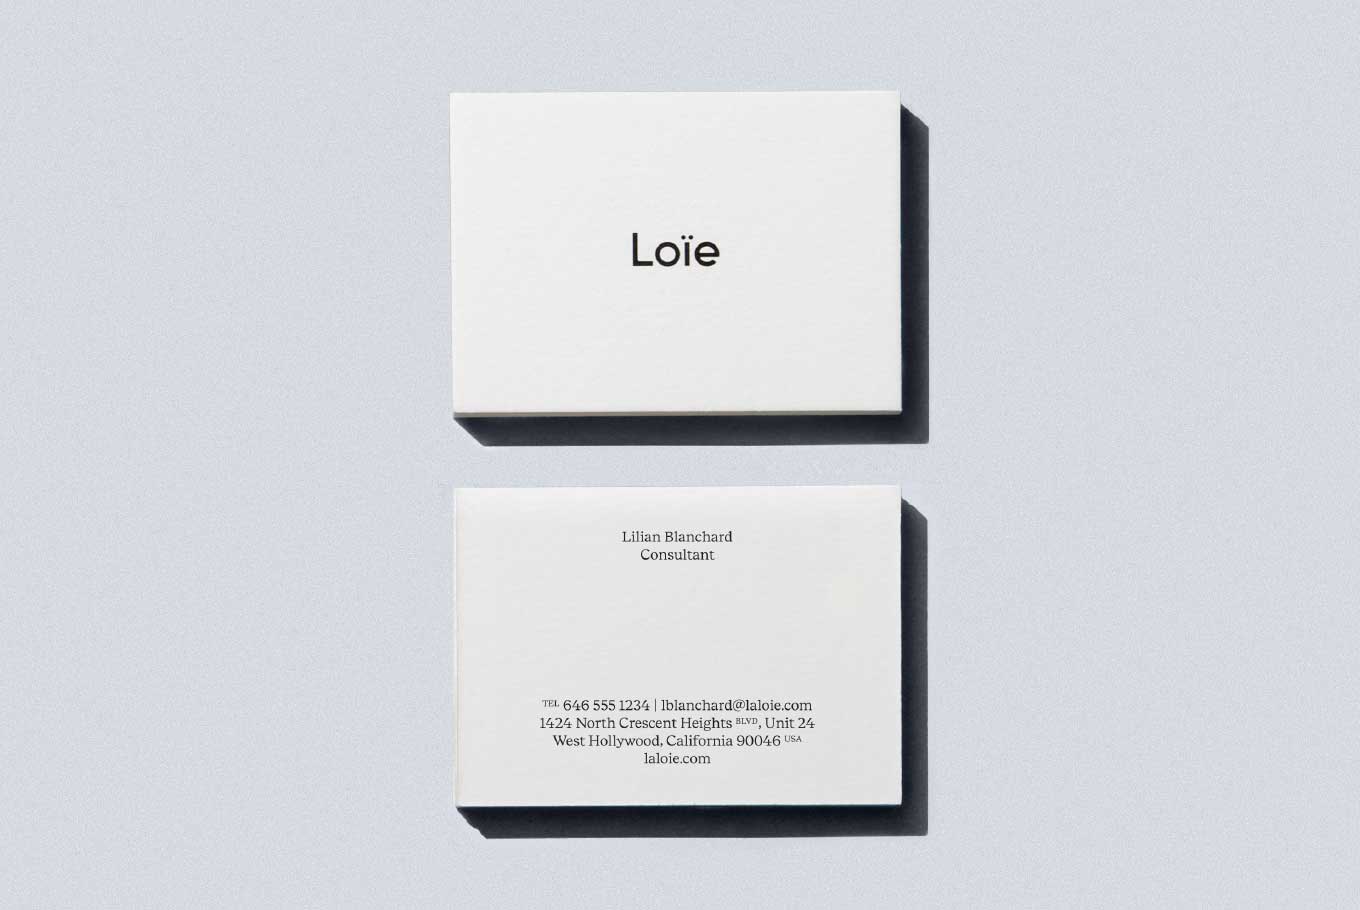 Loie business cards